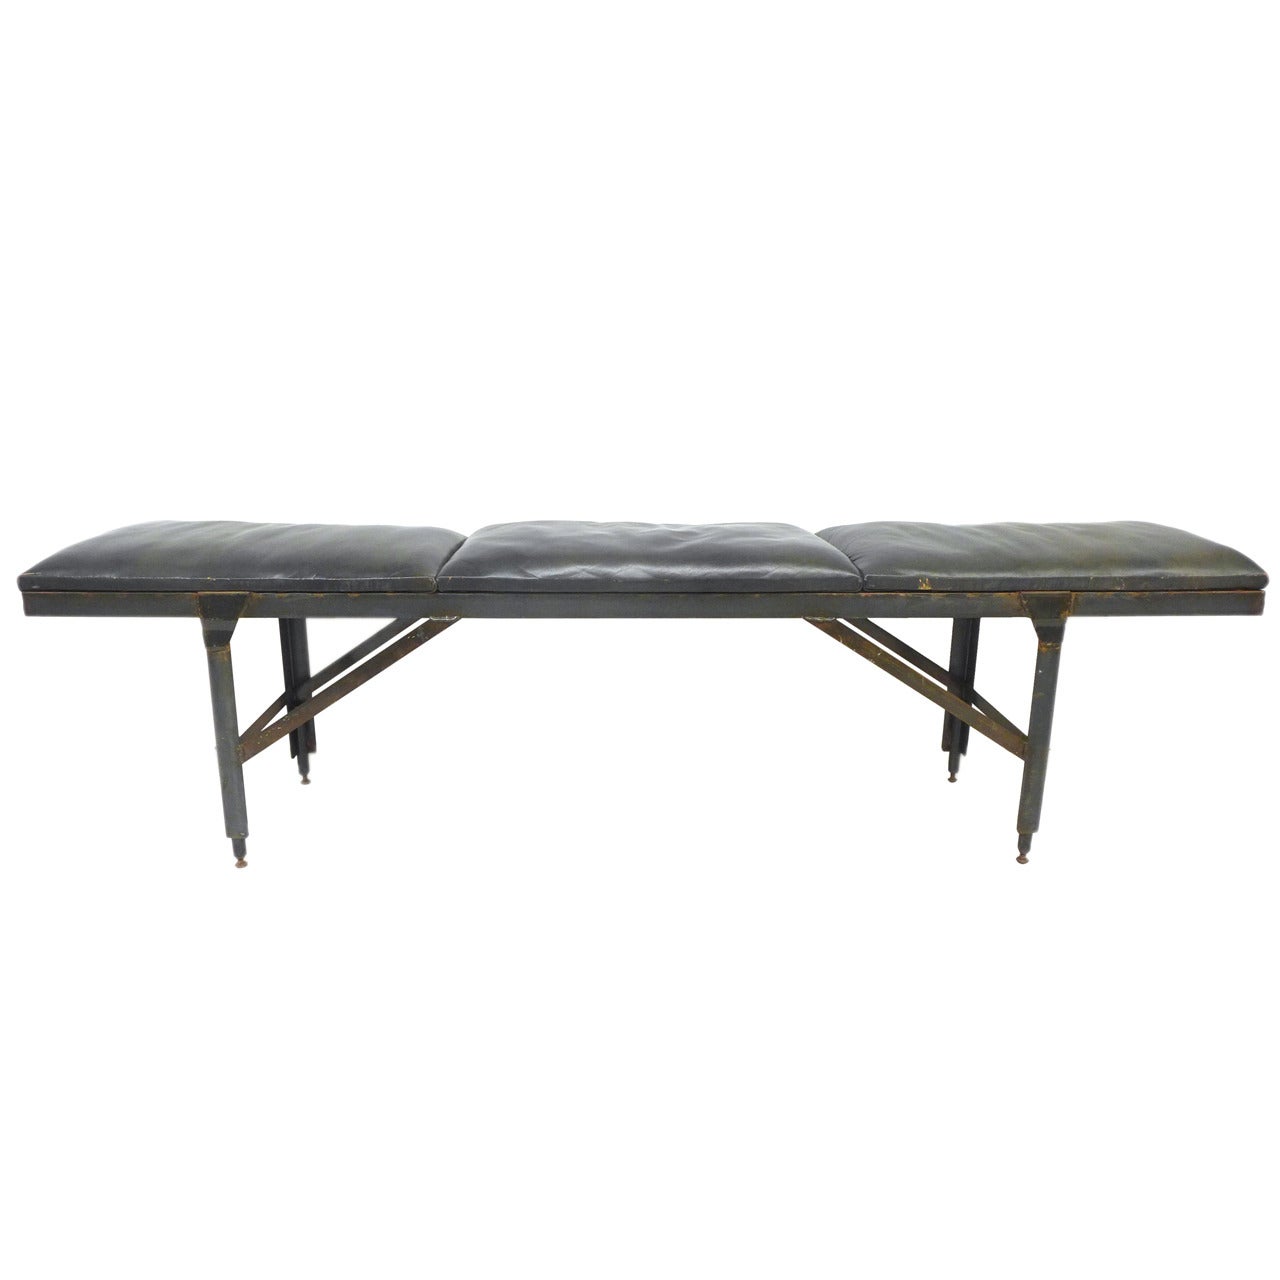 Welded Steel and Leather Bench